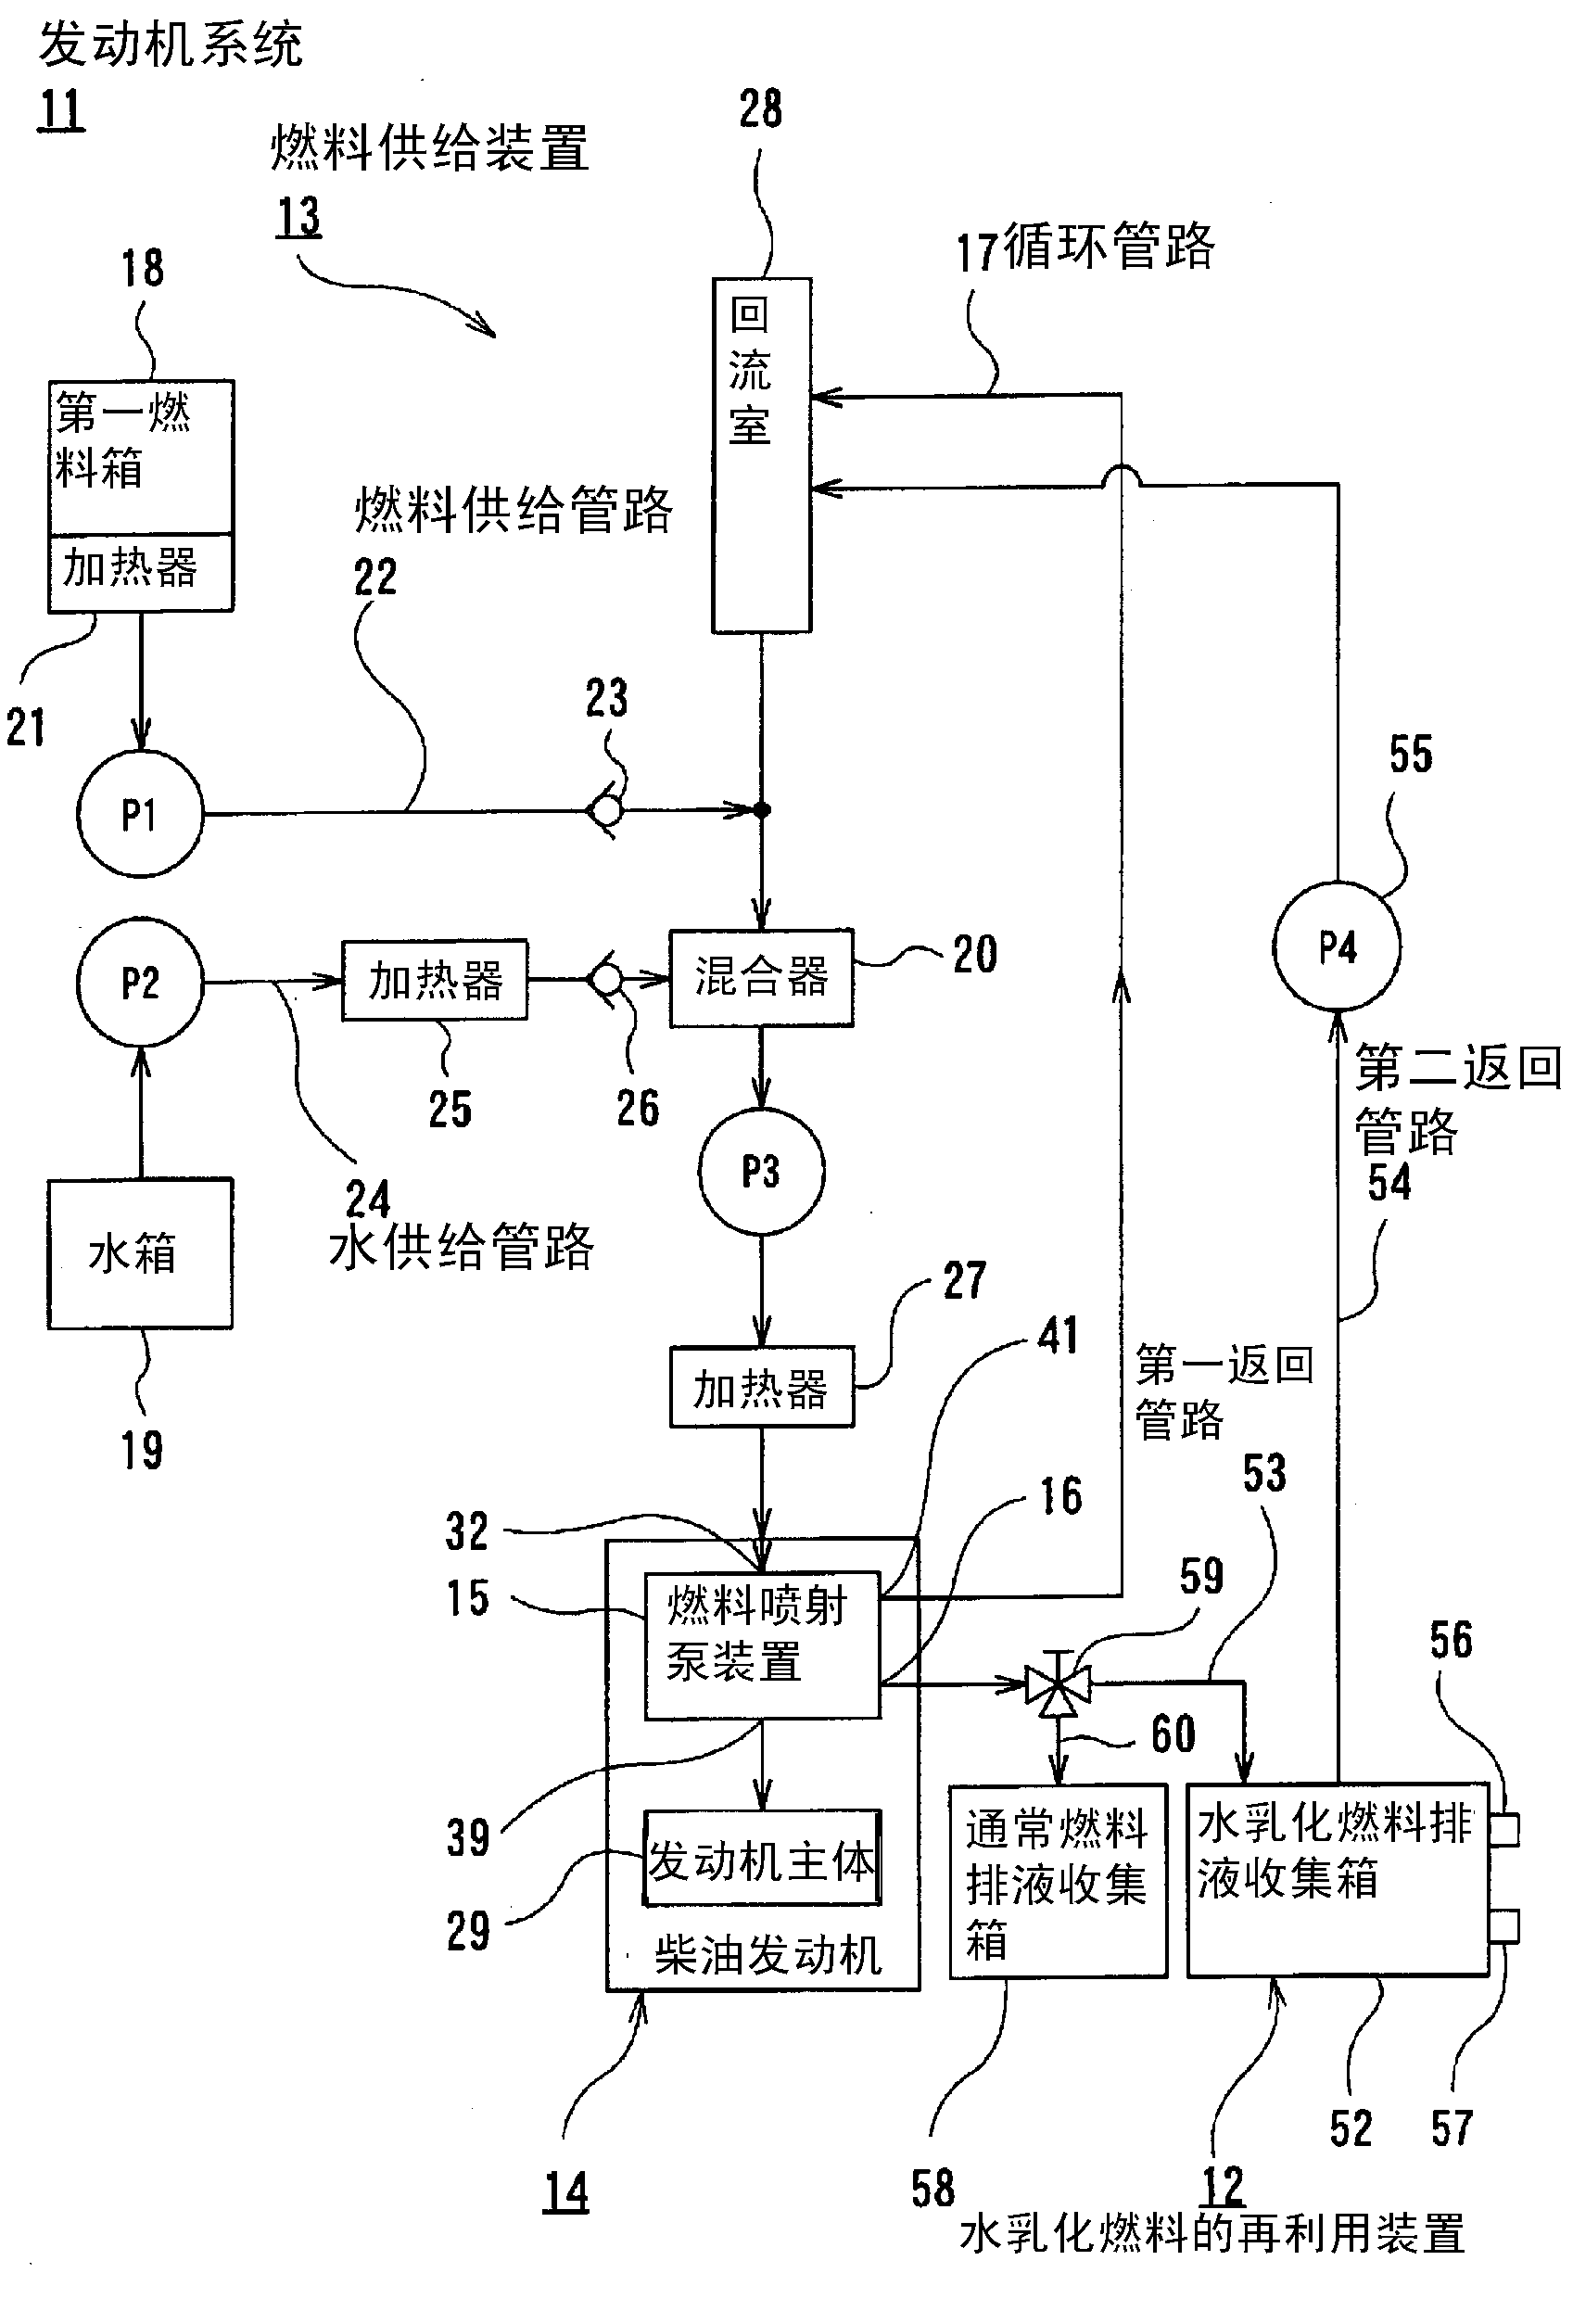 Engine system with reuse device for water emulsion fuel drain